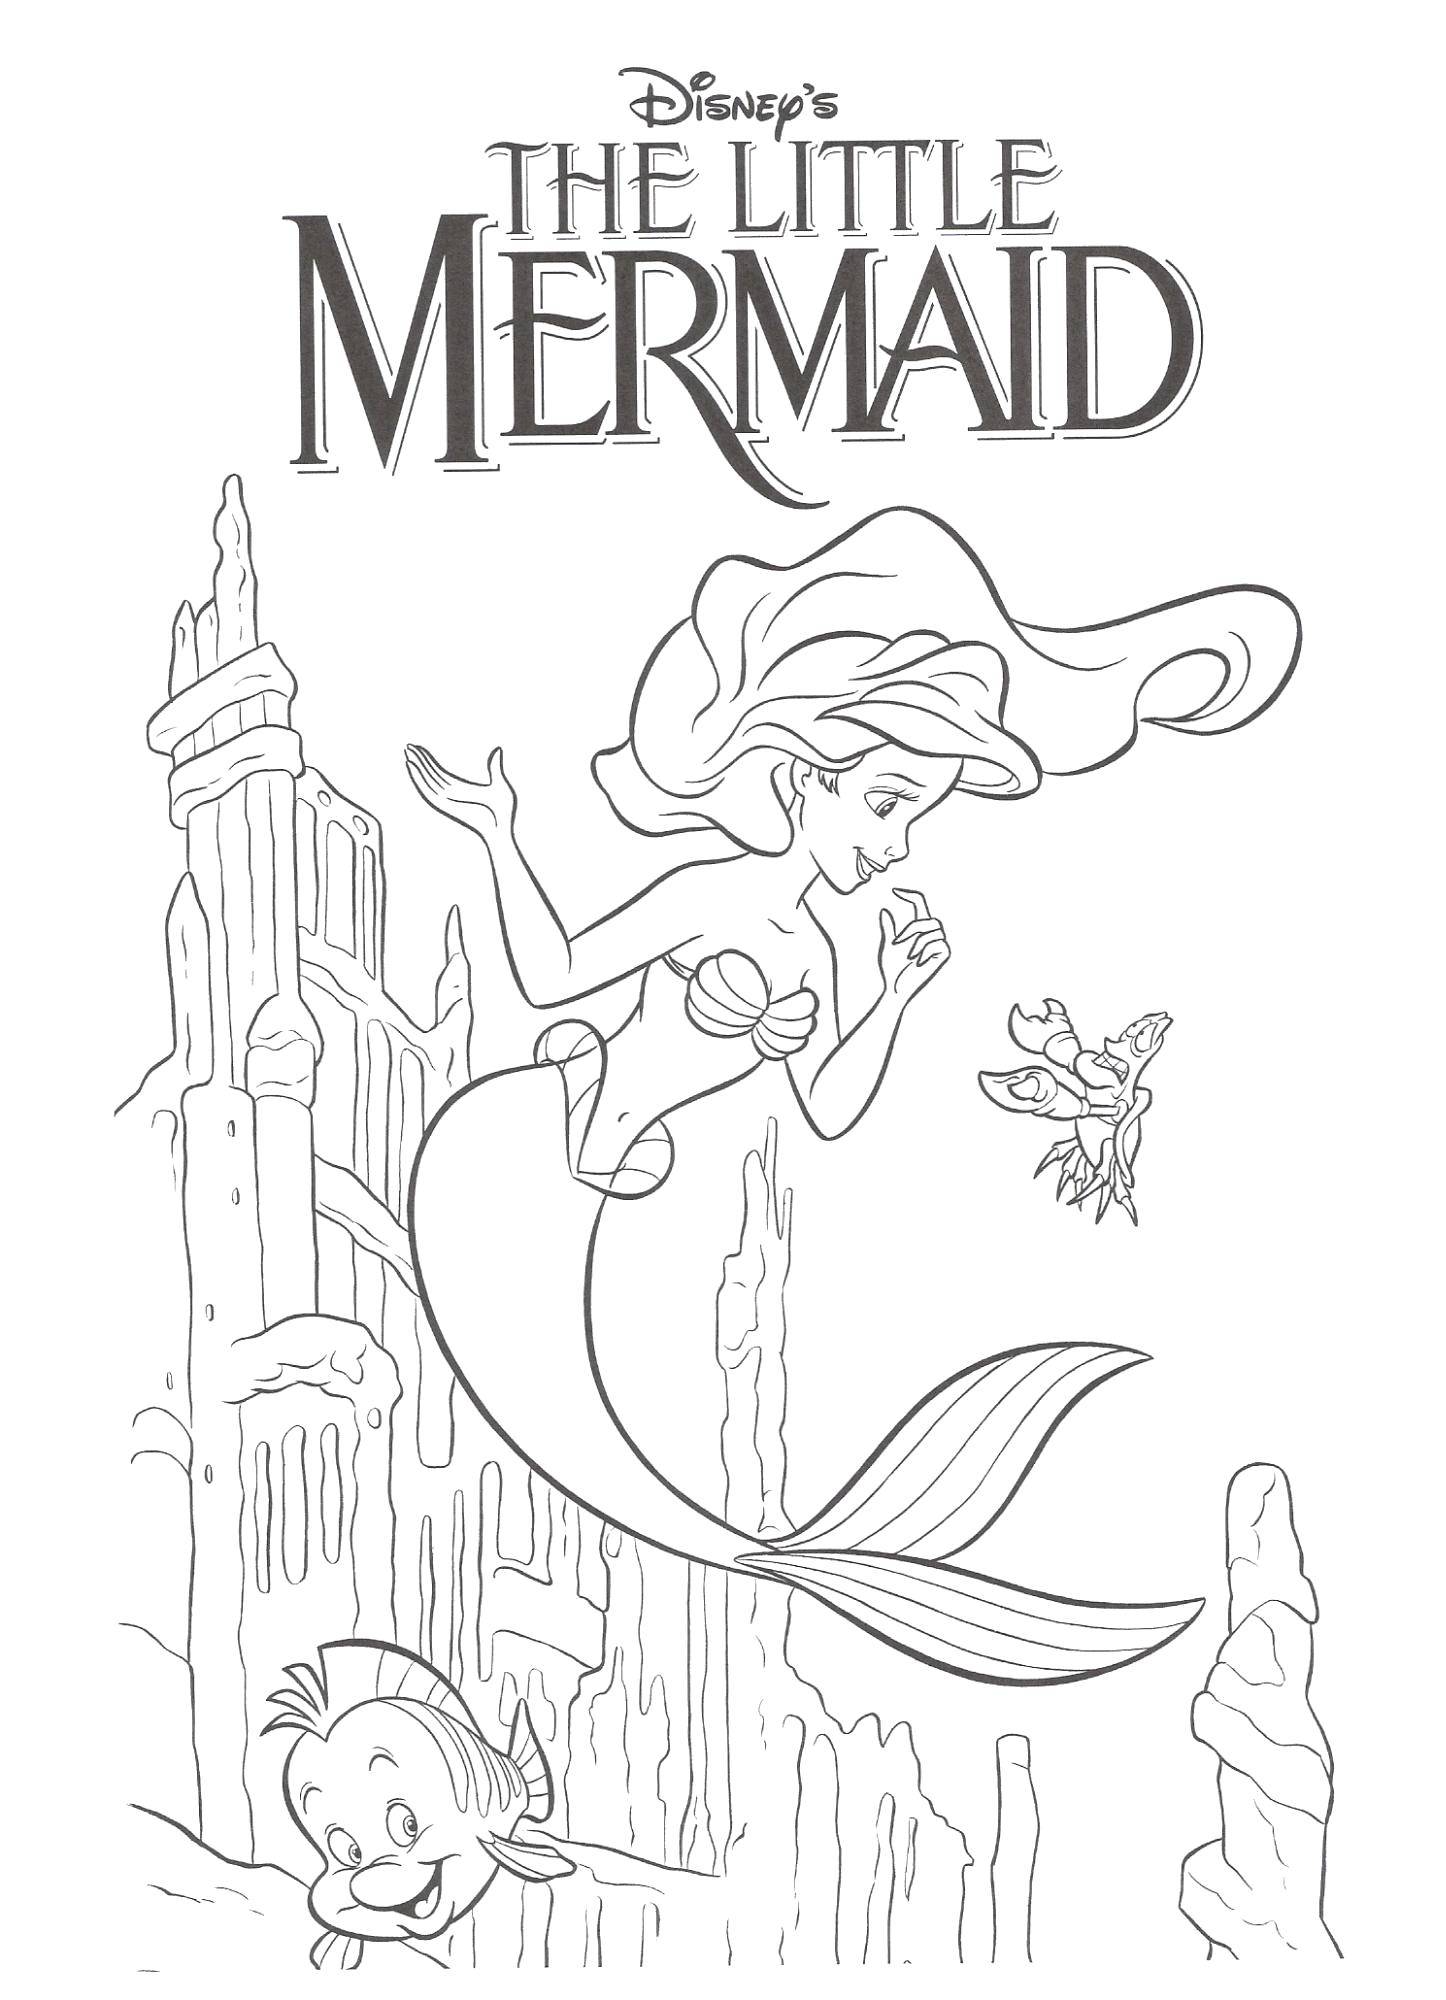 Coloring Little mermaid. Category The little mermaid. Tags:  Disney, the little mermaid, Ariel.